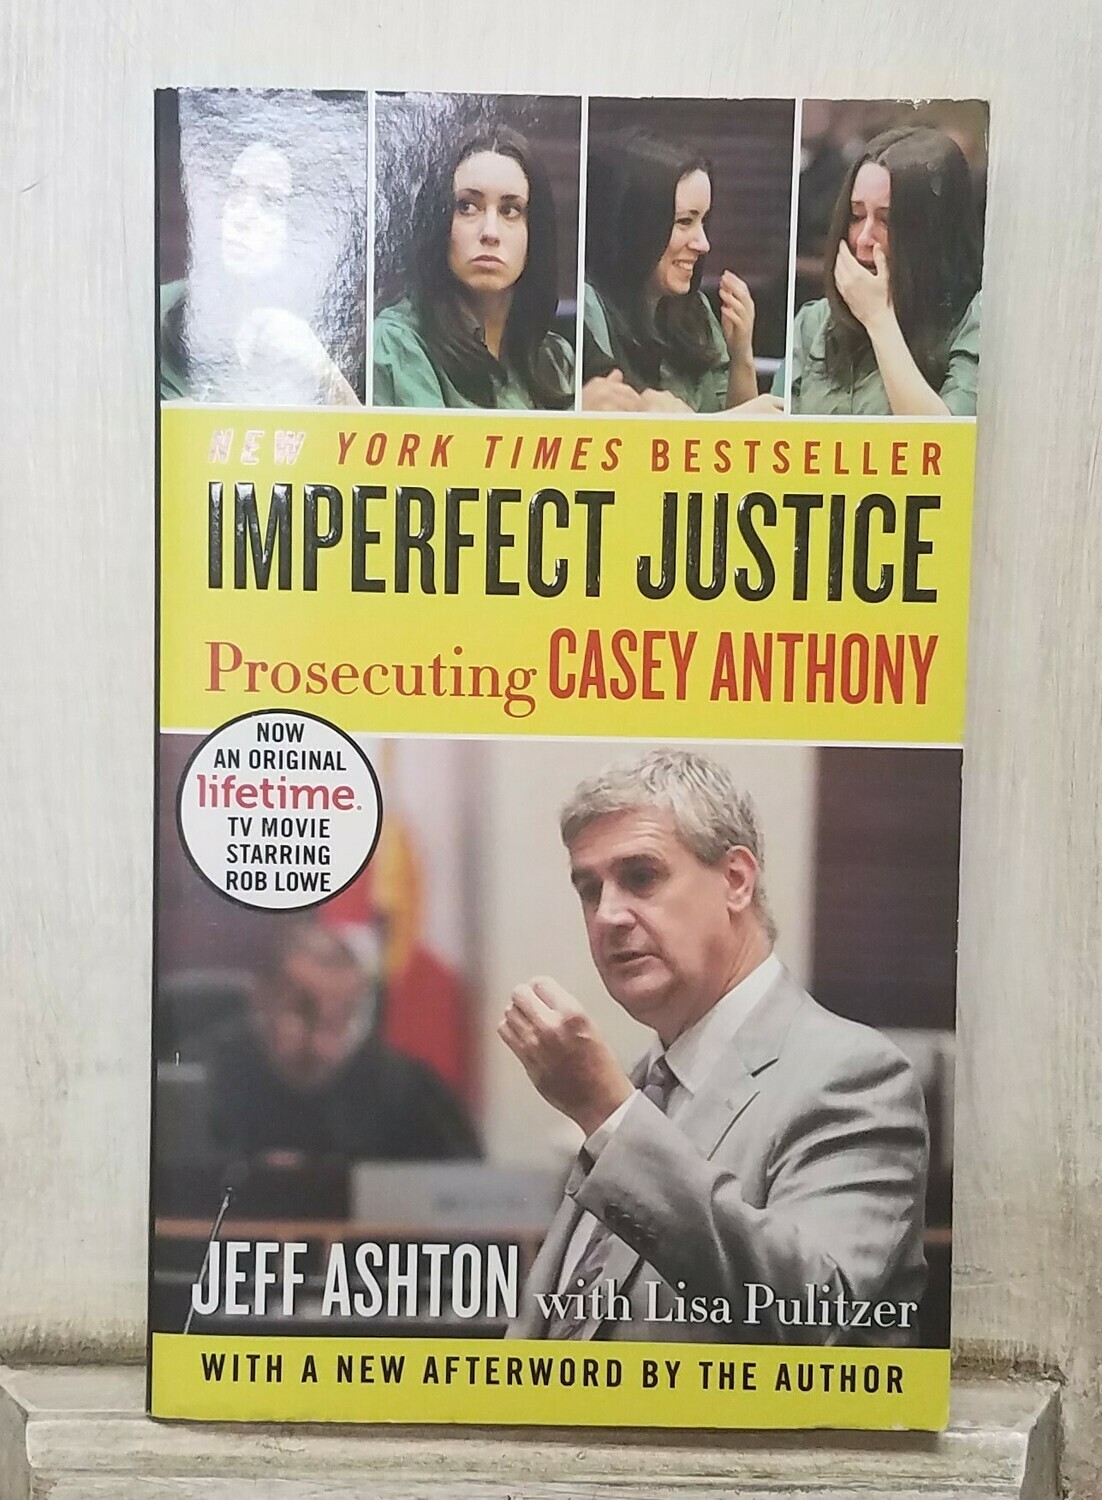 Imperfect Justice: Prosecuting Casey Anthony by Jeff Ashton with Lisa Pulitzer